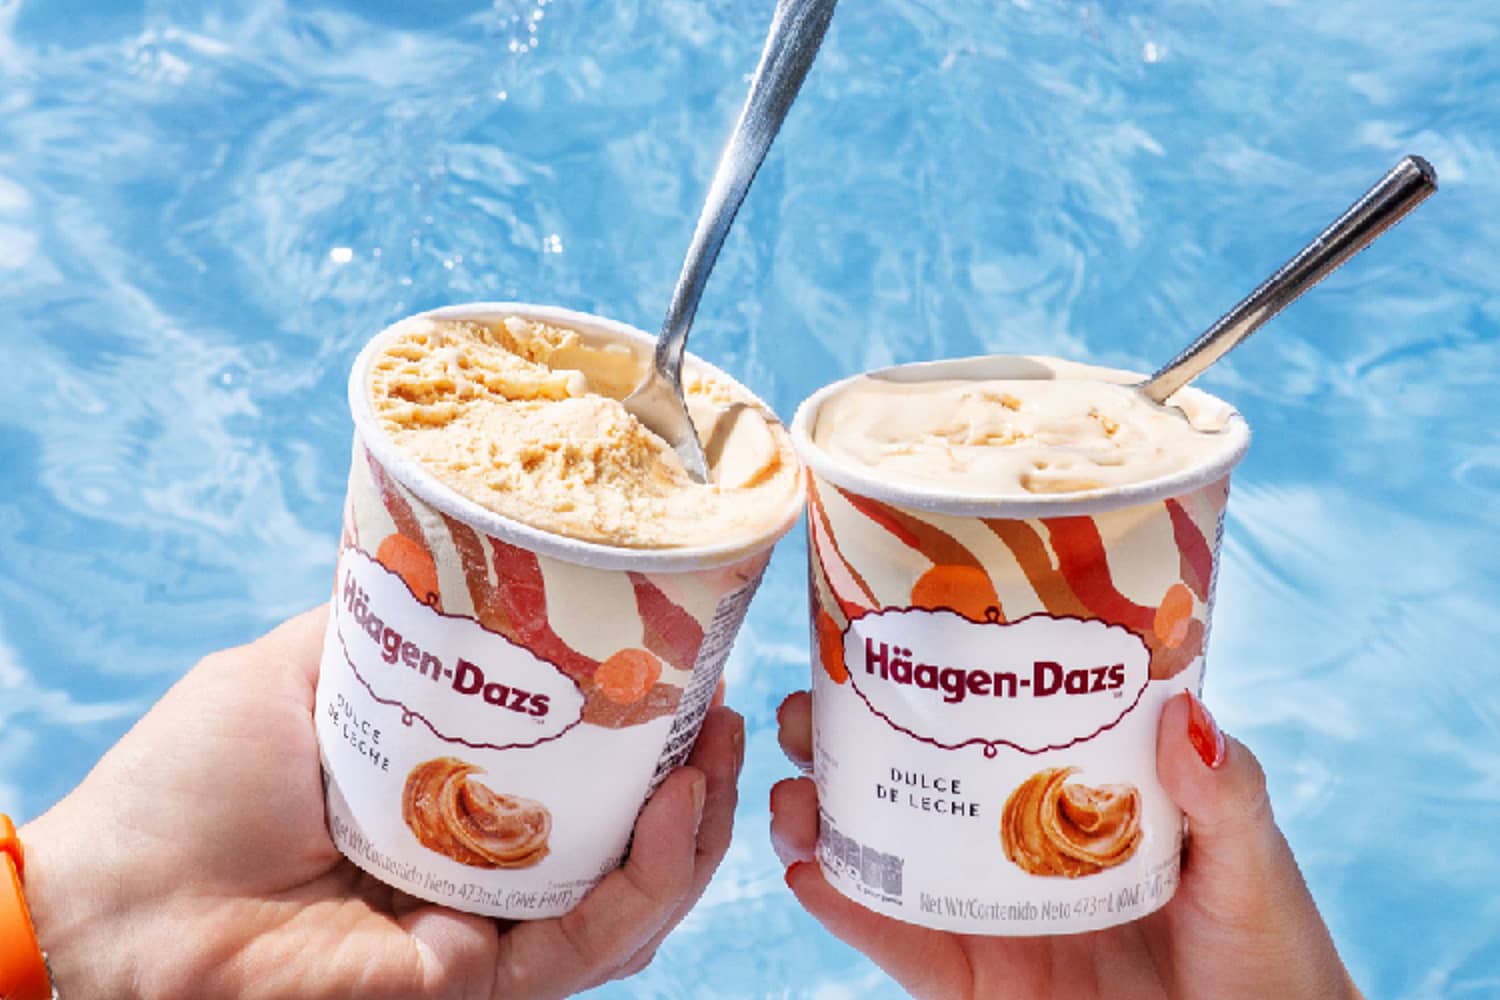 Haagen-Dazs-products-image